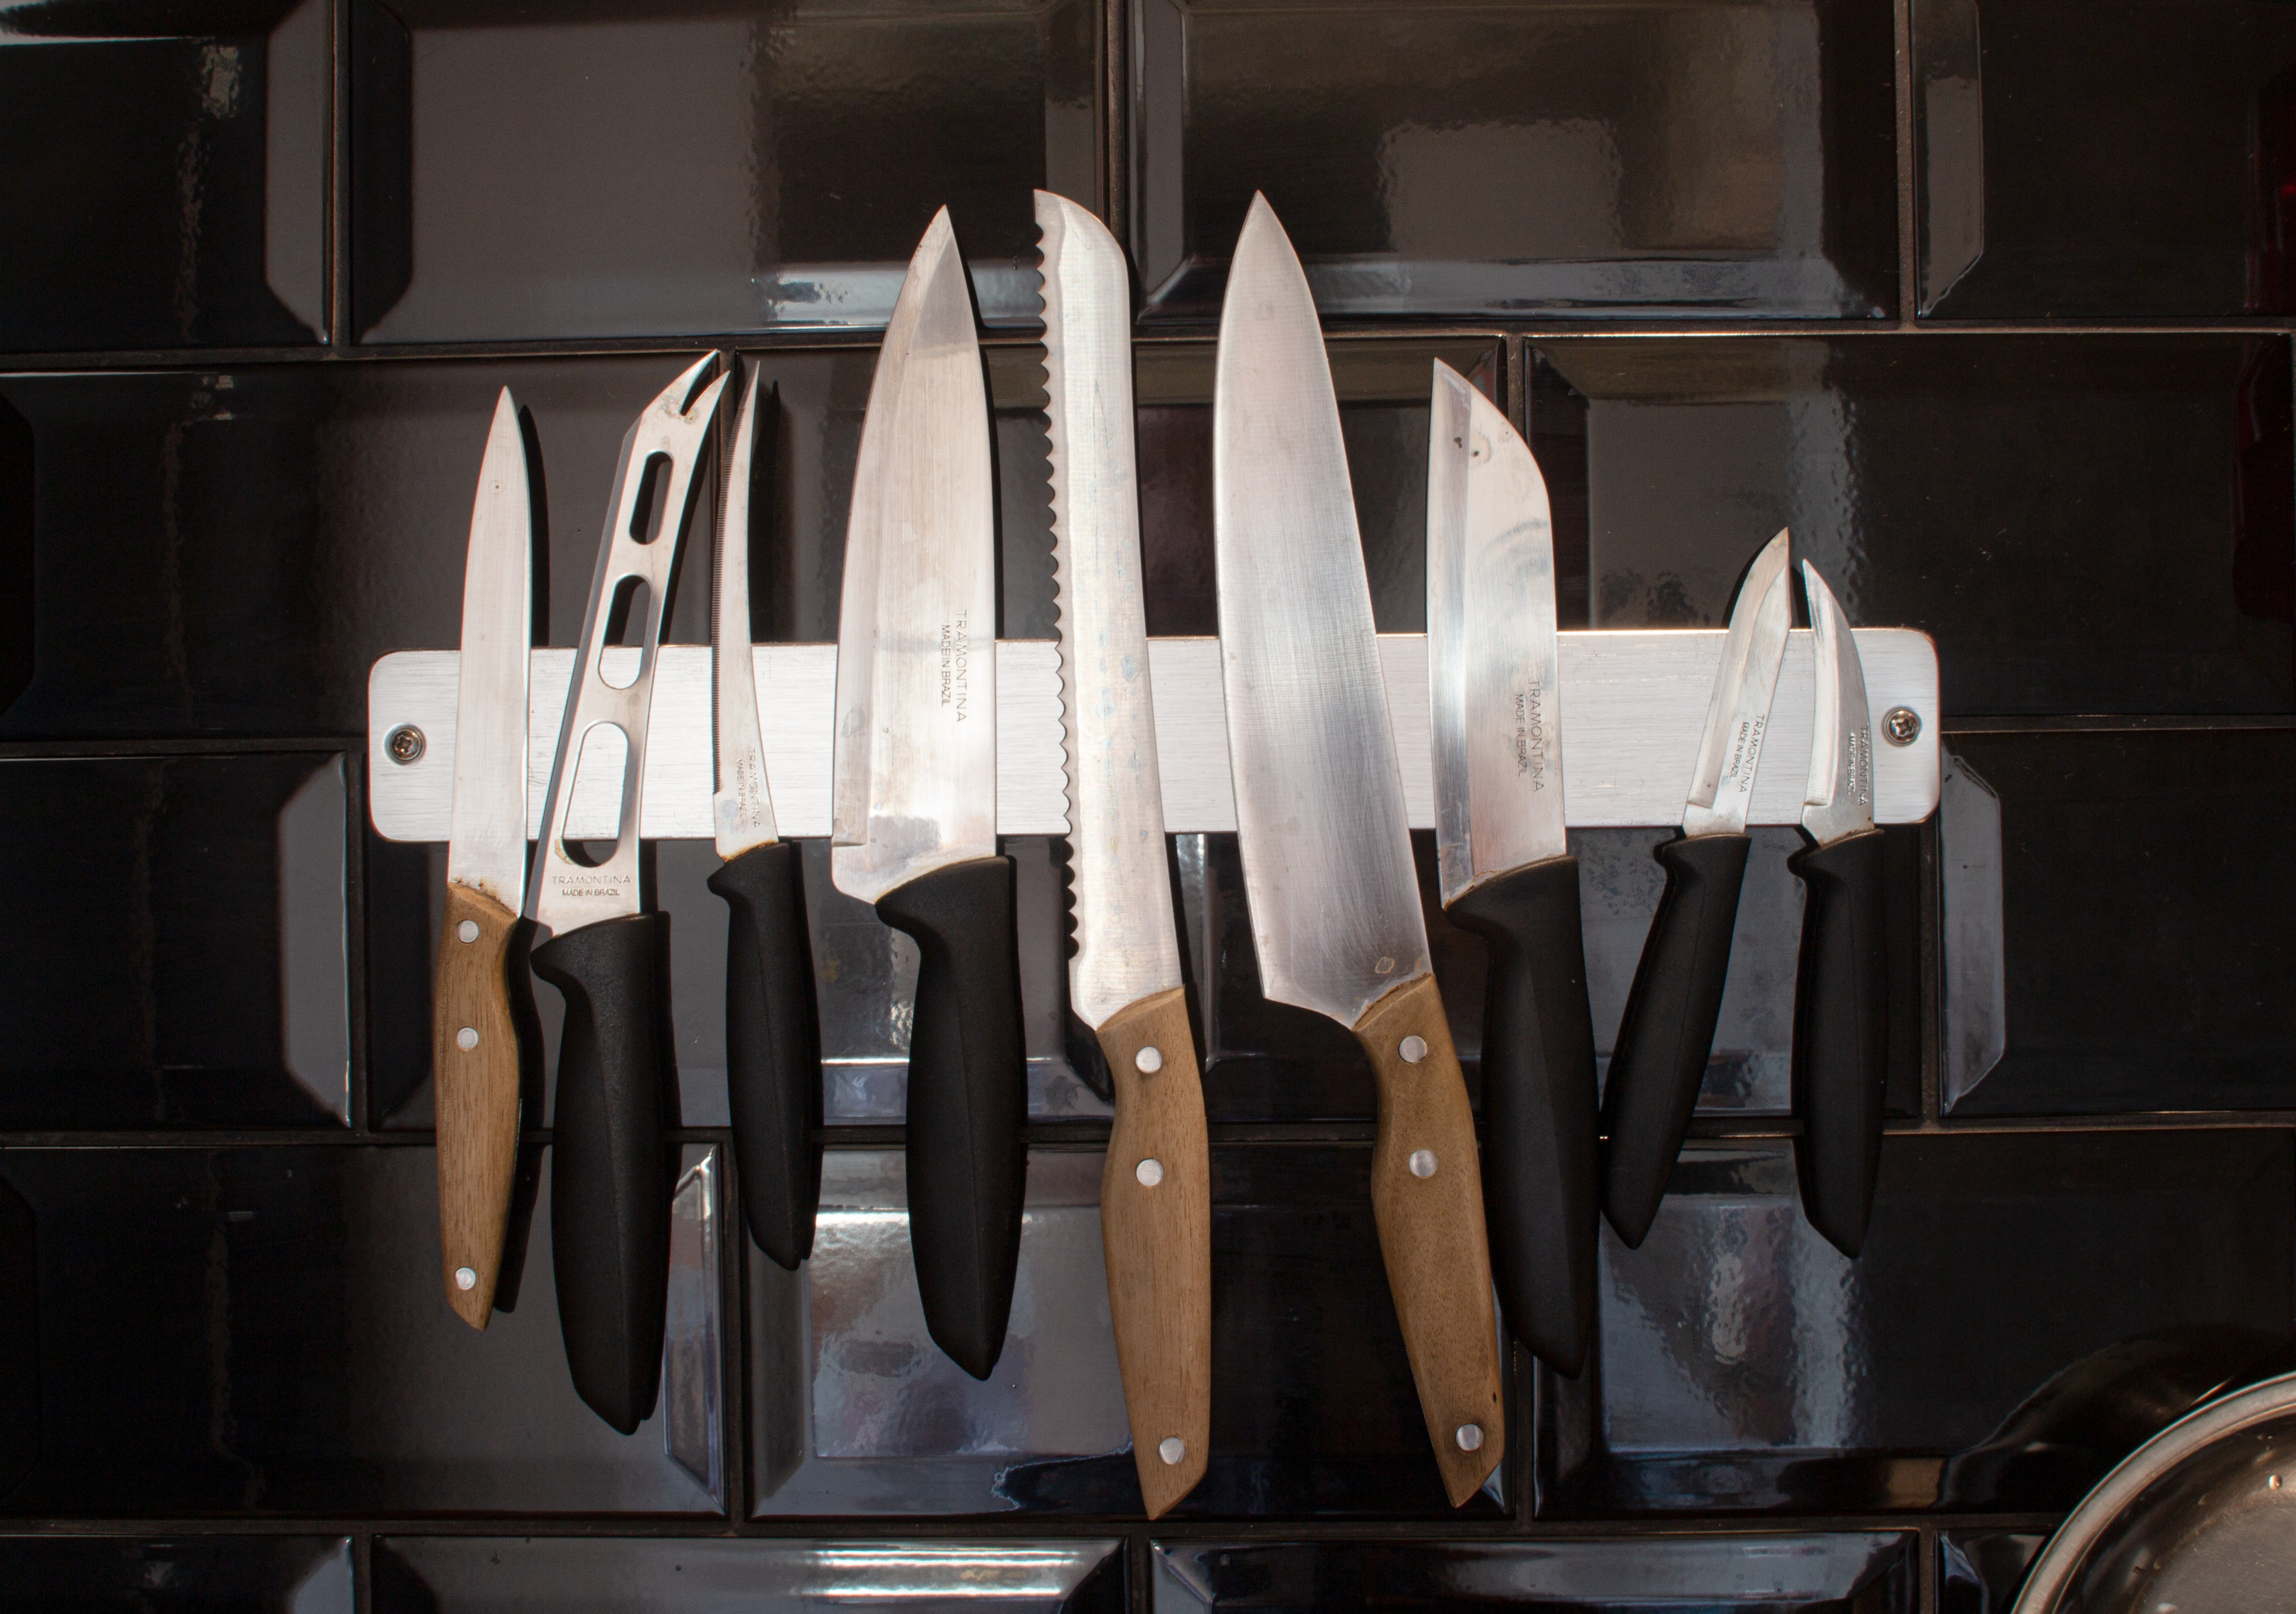 Knives on a Magnetic Strip